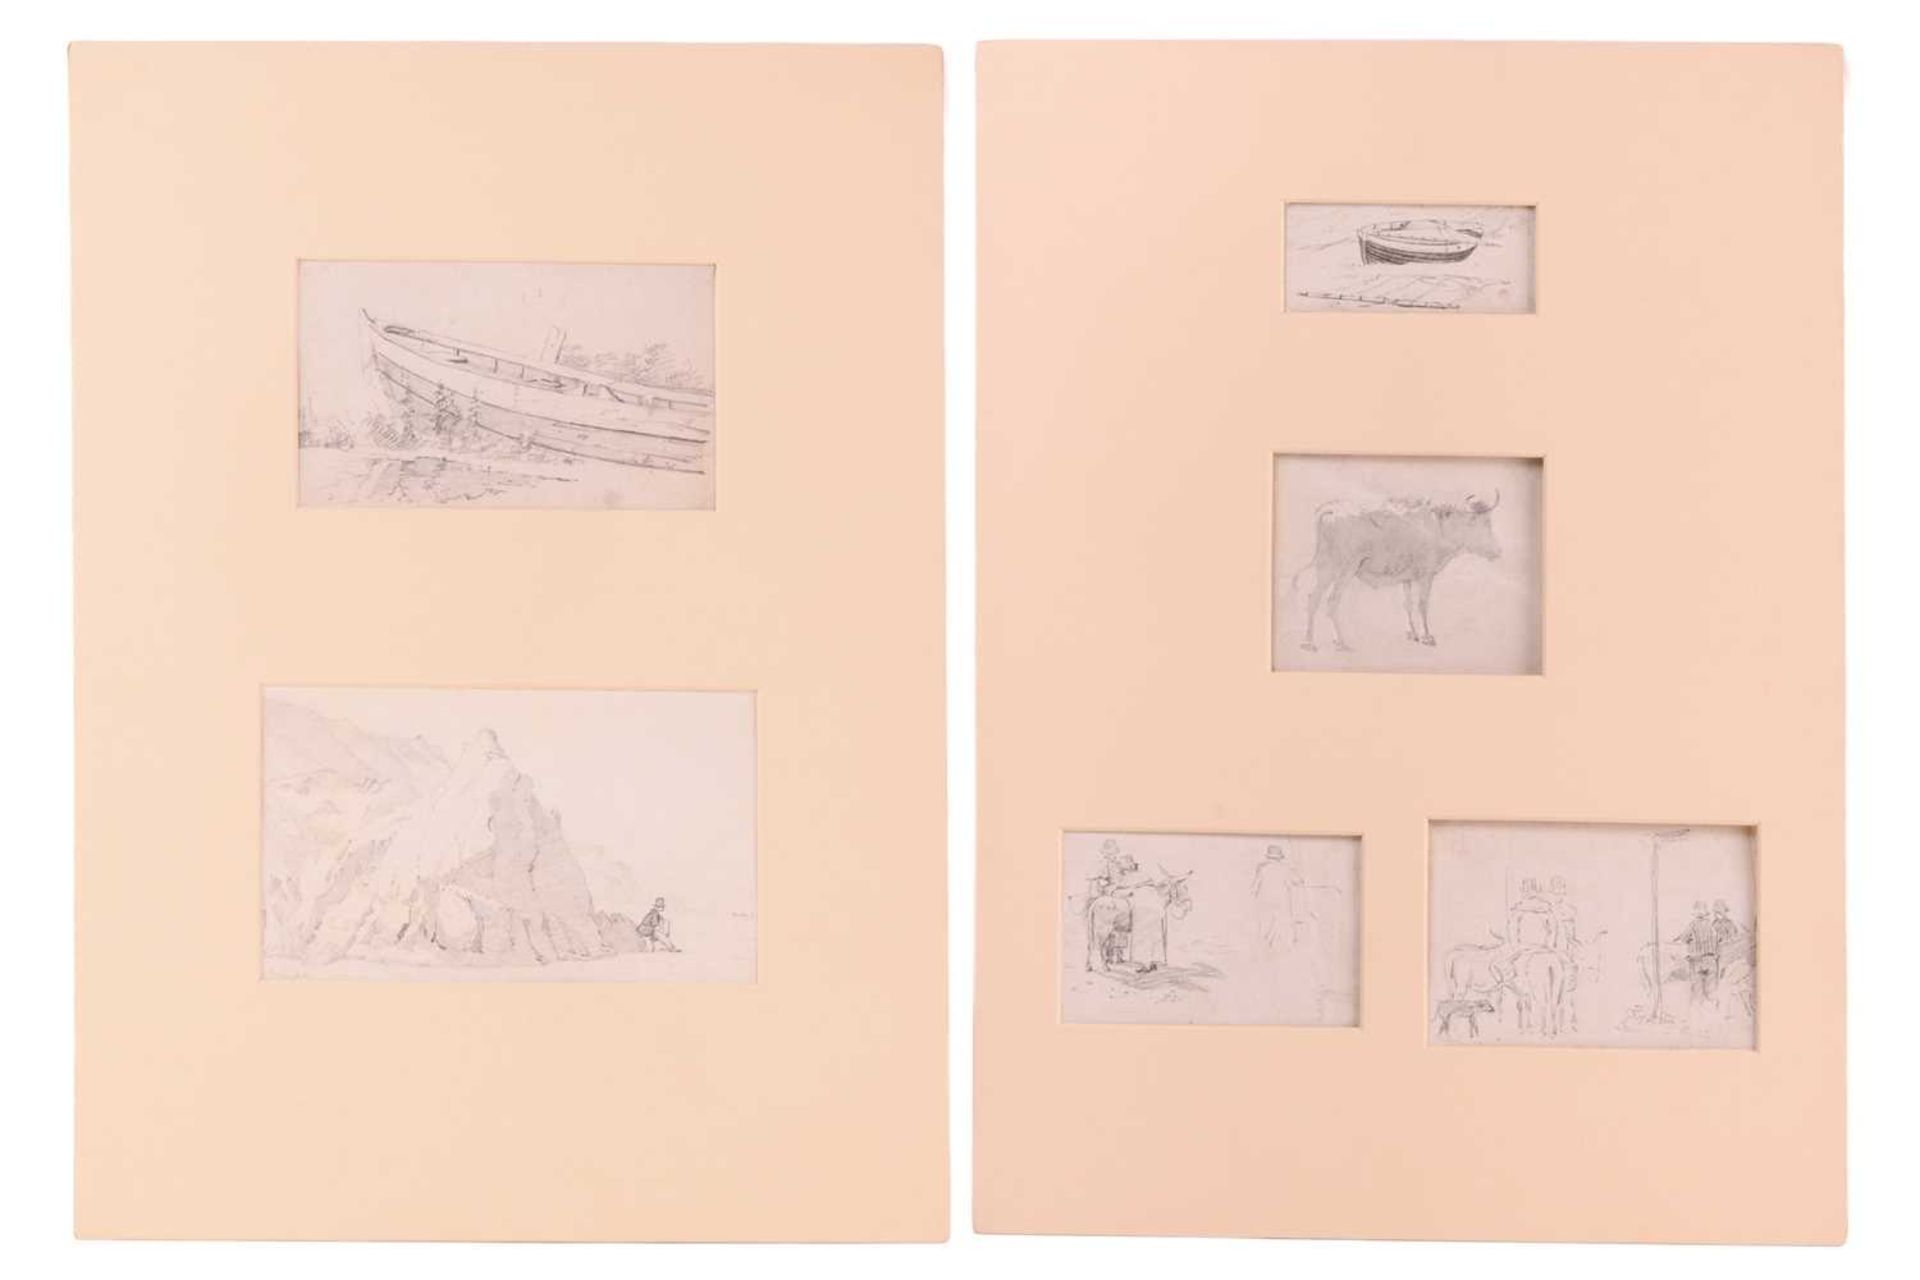 Joseph Stannard (1797-1830), four pencil sketches on paper, collated in a card mount, depicting